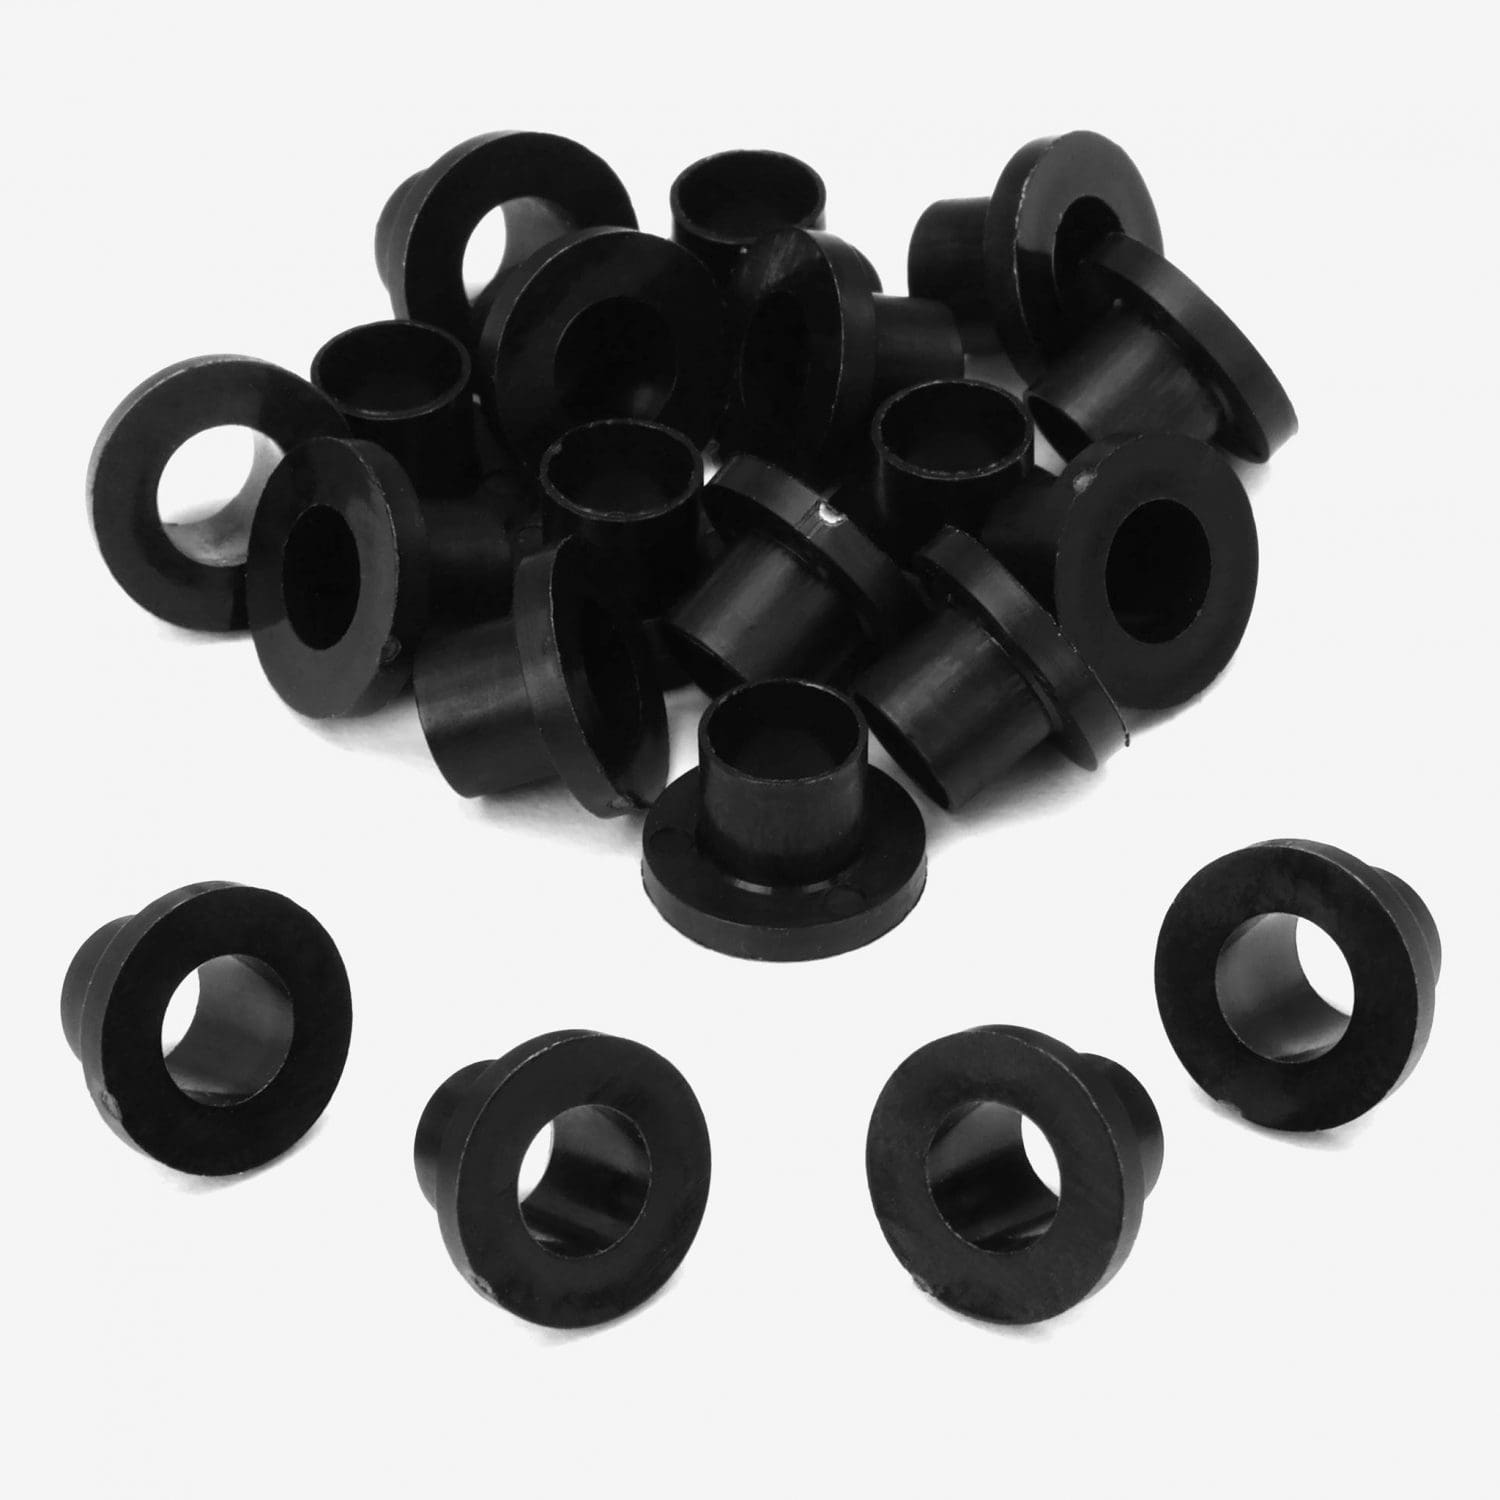 20-Pack Nylon Tension Rod Washers